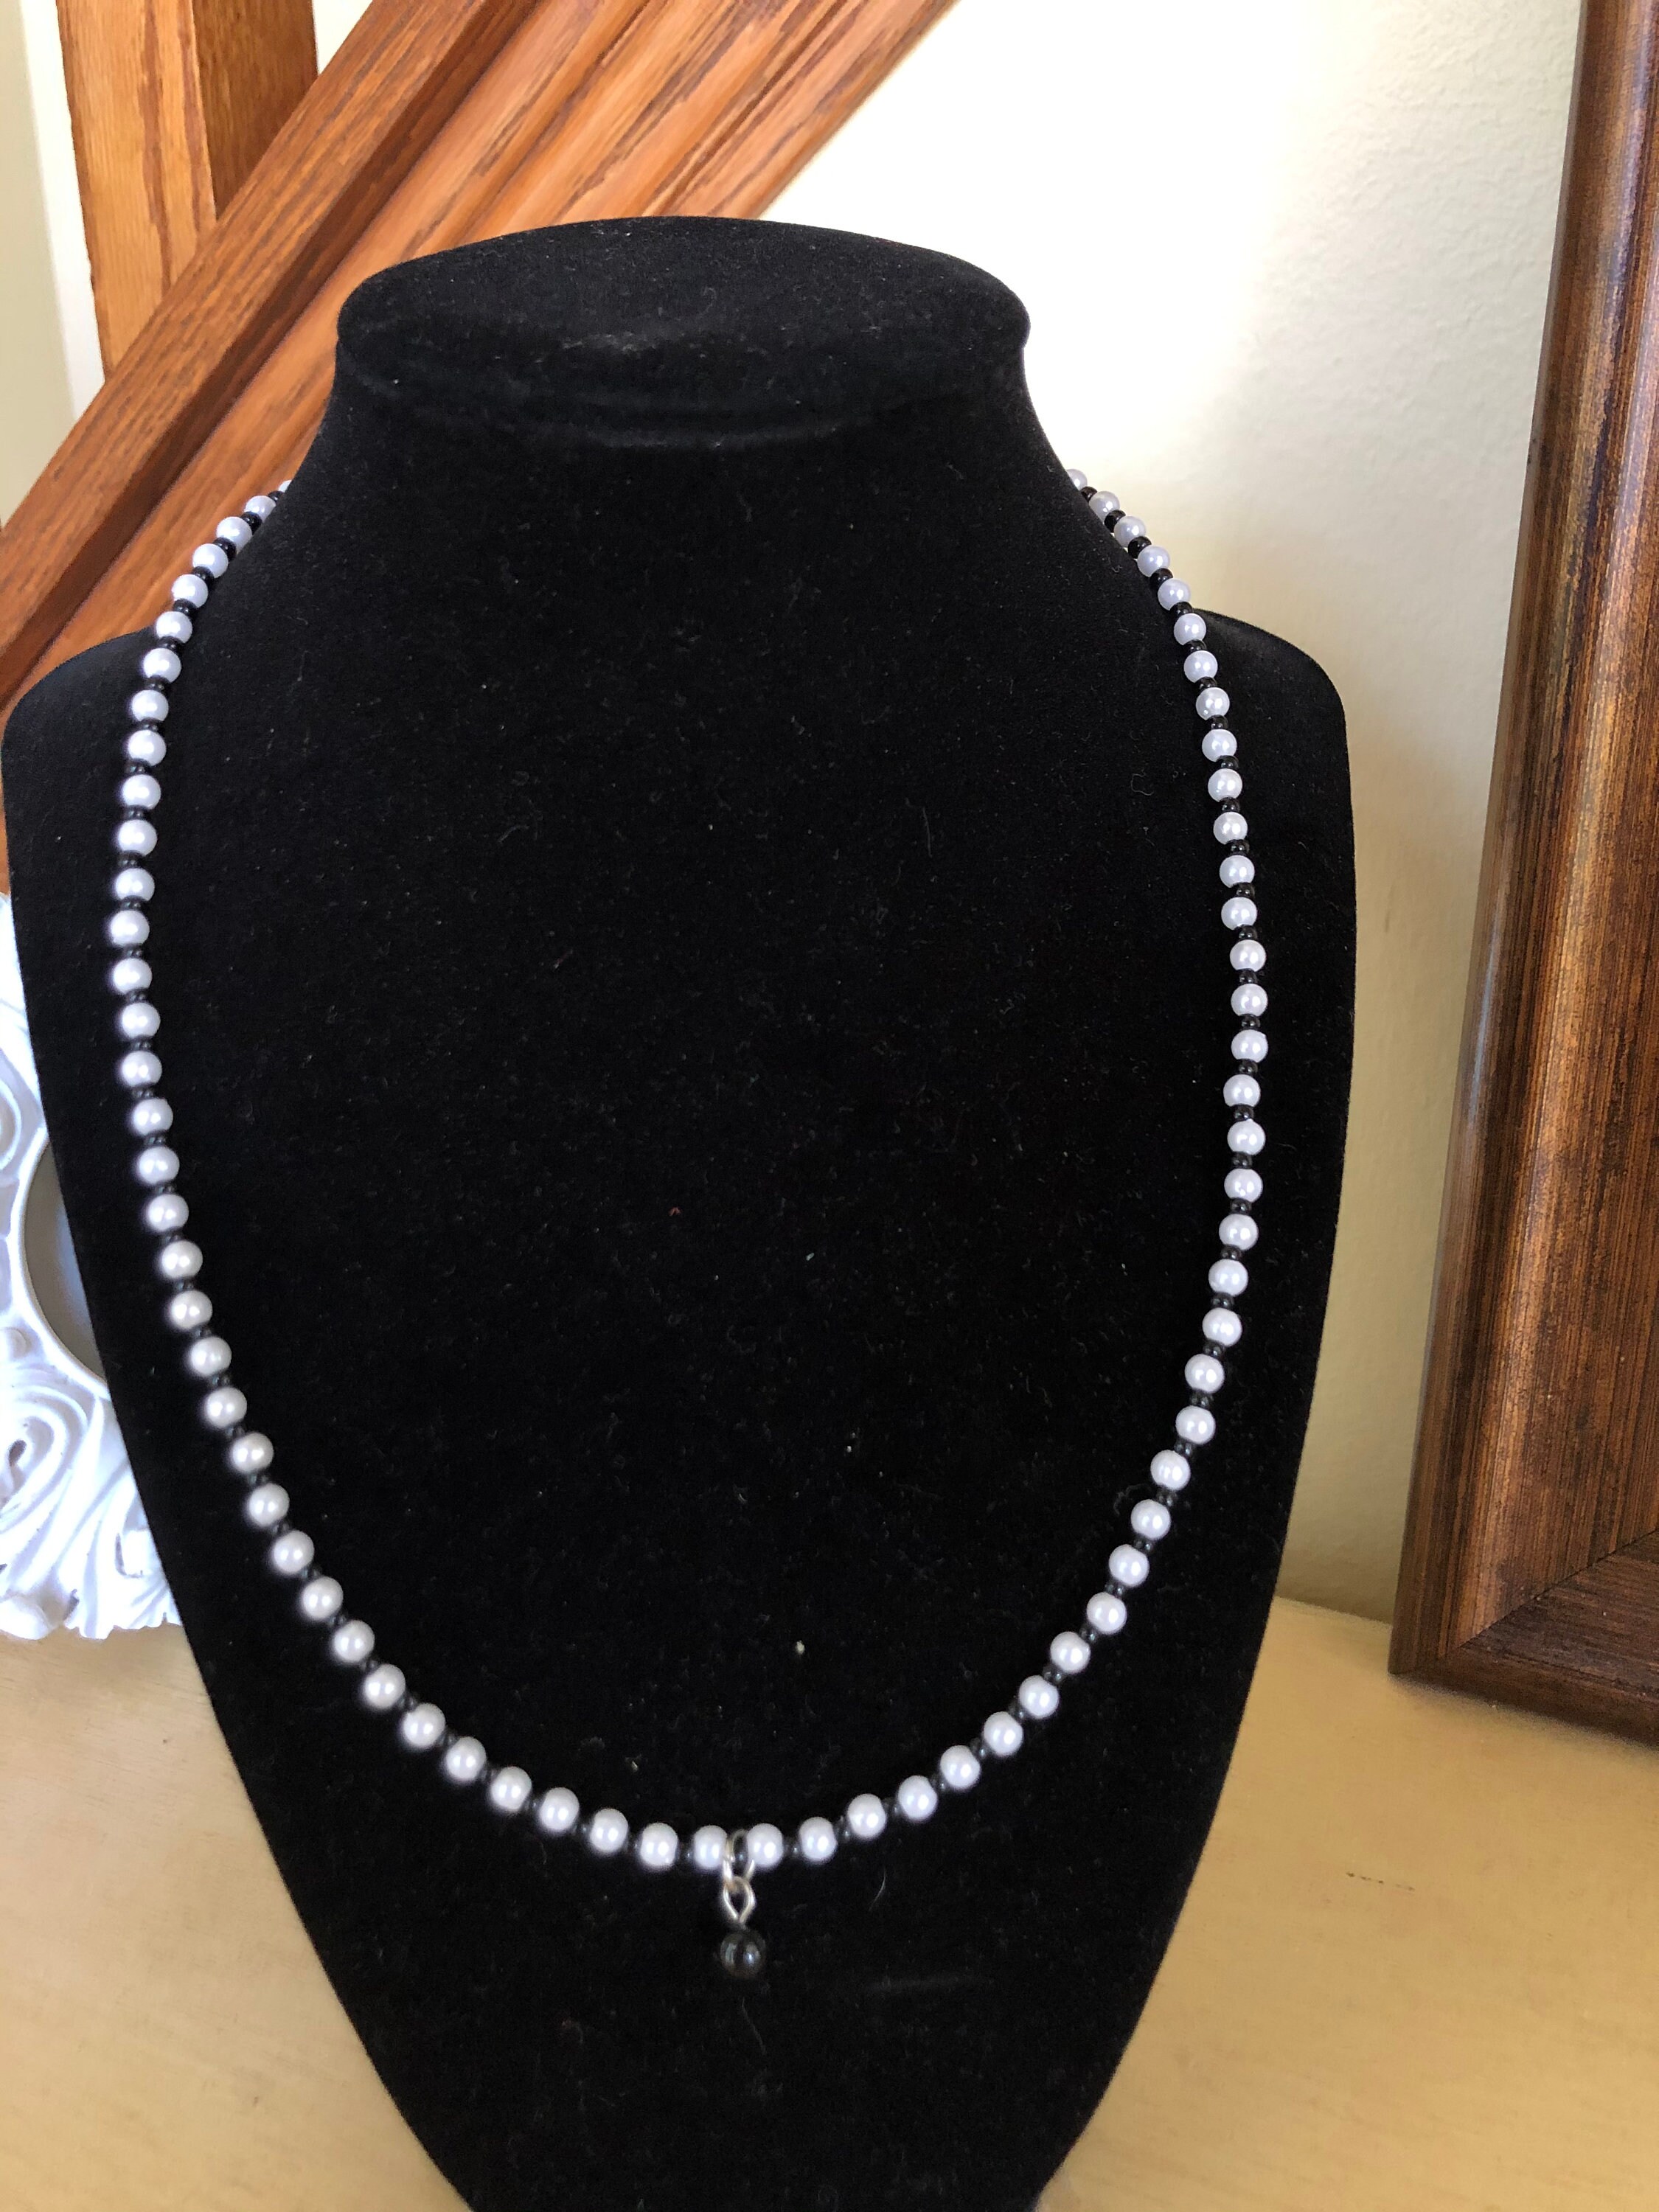 Black and White Pearl Necklace - Etsy